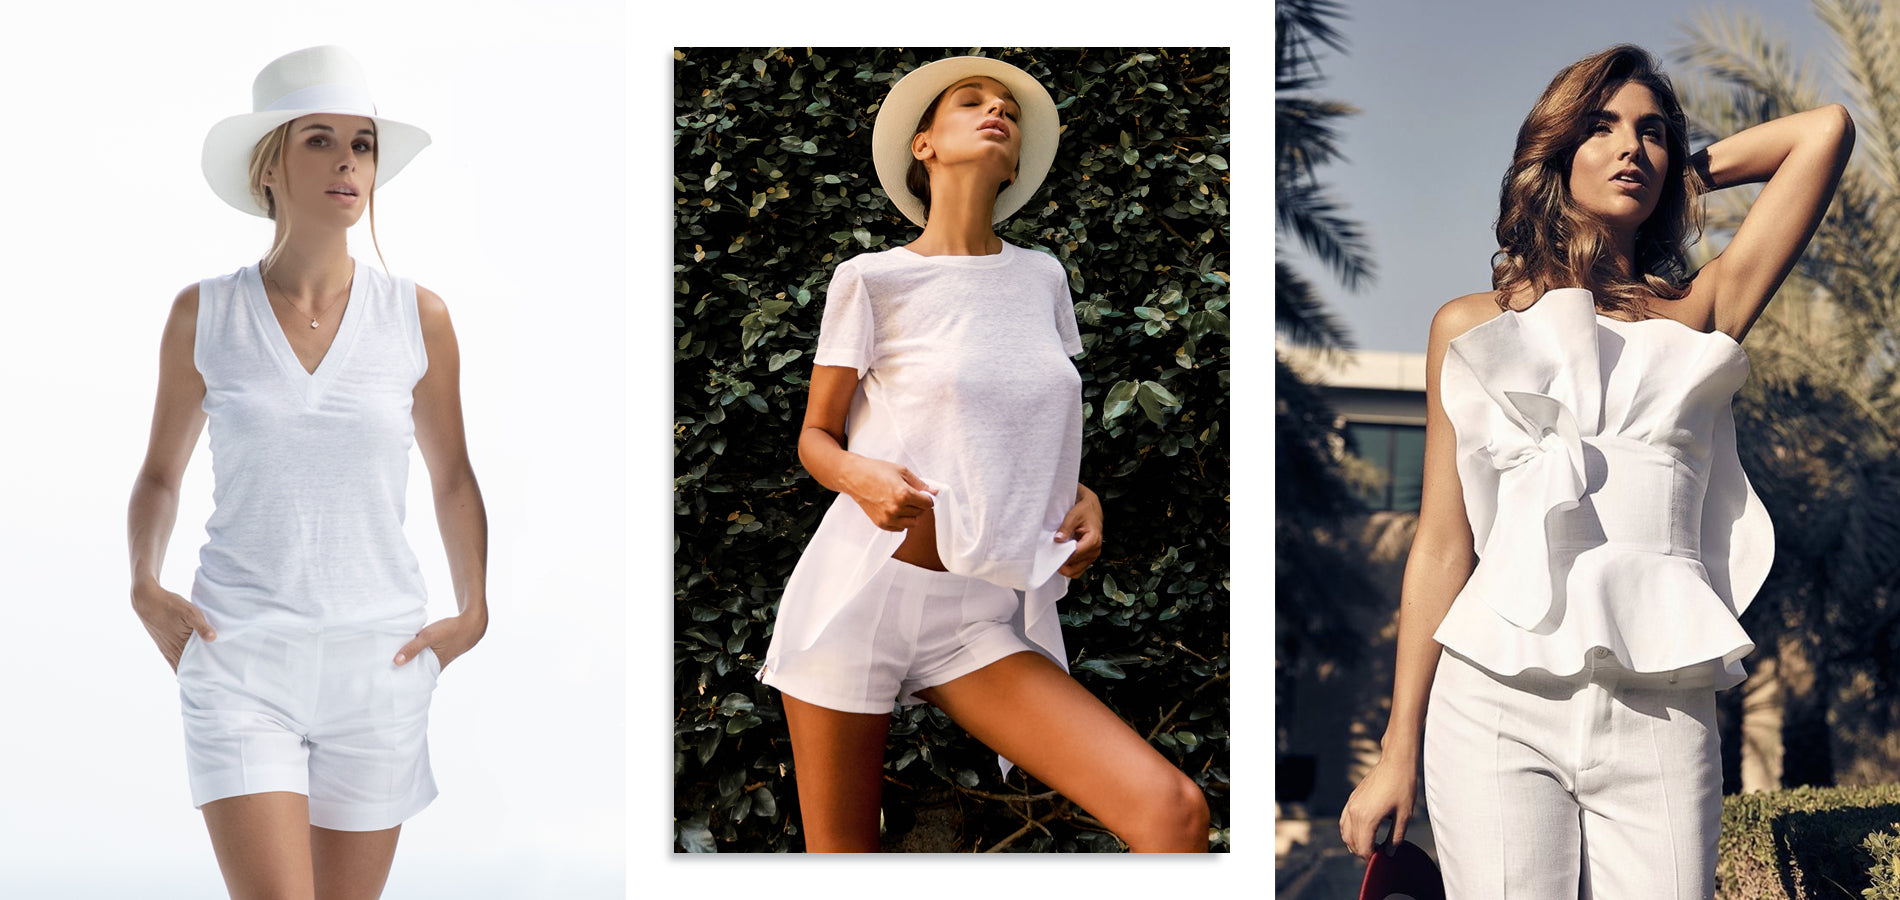 Italian Linen Dresses for Women, 100% Linen. Made in Italy. Perfect look  for sophisticated women